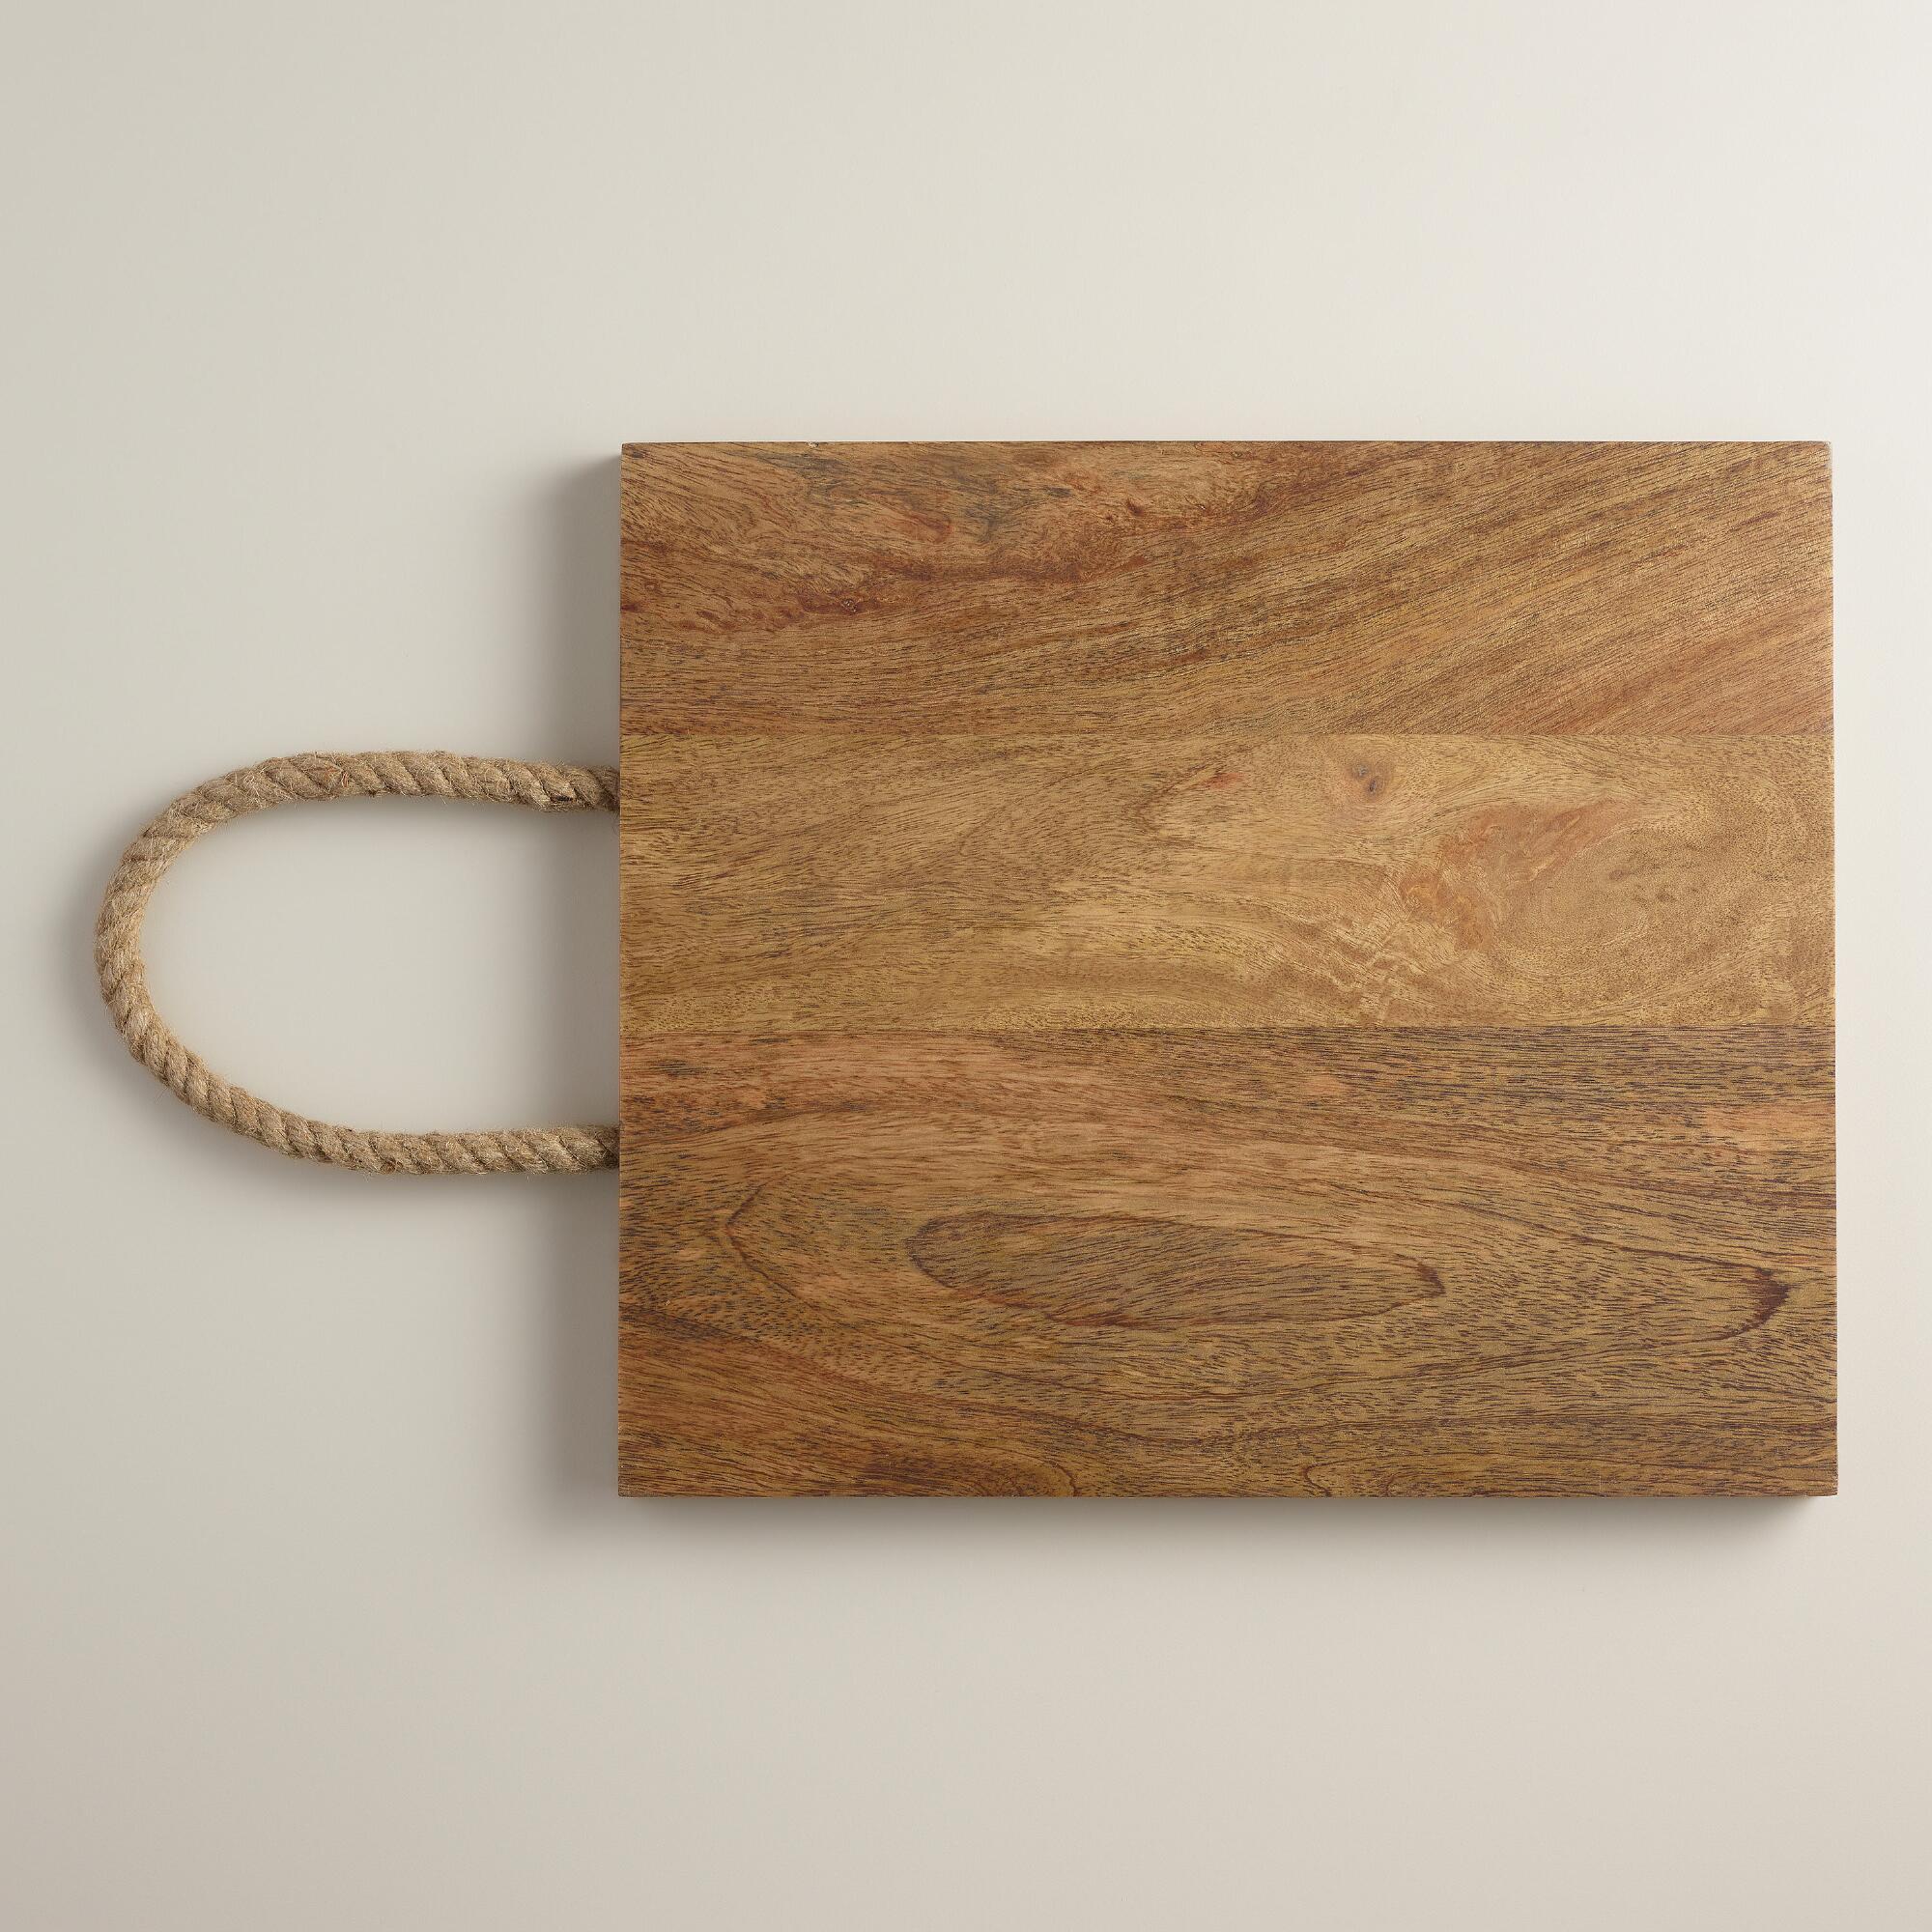 Our nautical-inspired natural wood chopping board features woven ...